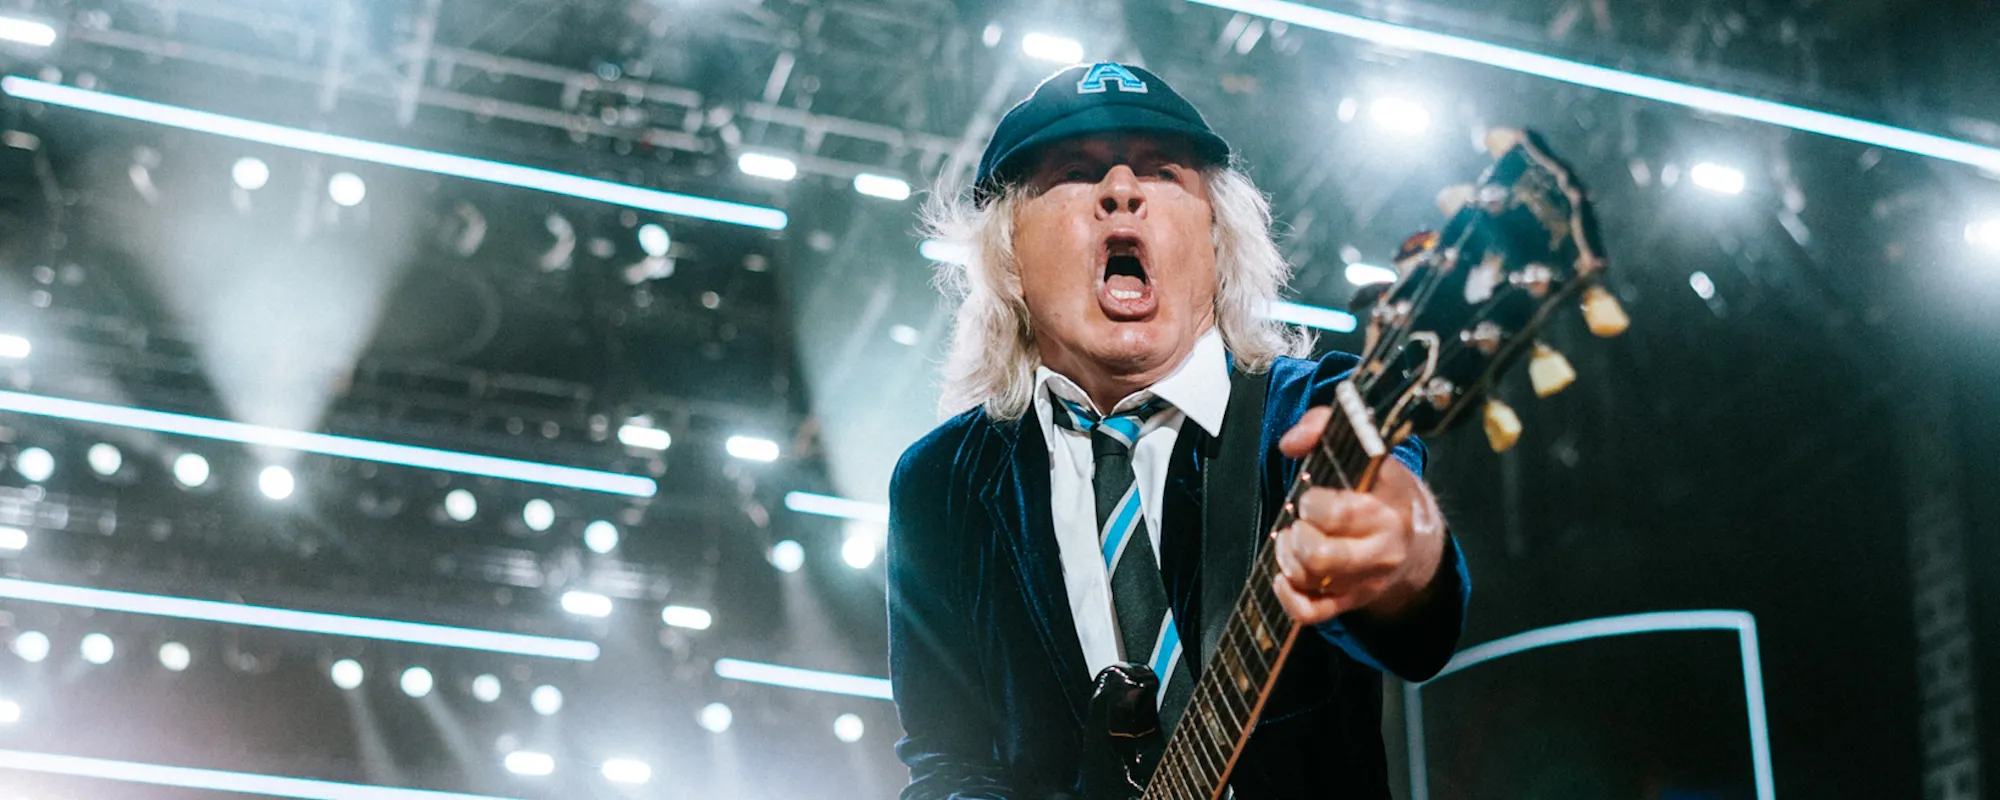 Watch: AC/DC Return to Stage After Seven Years, Full Setlist